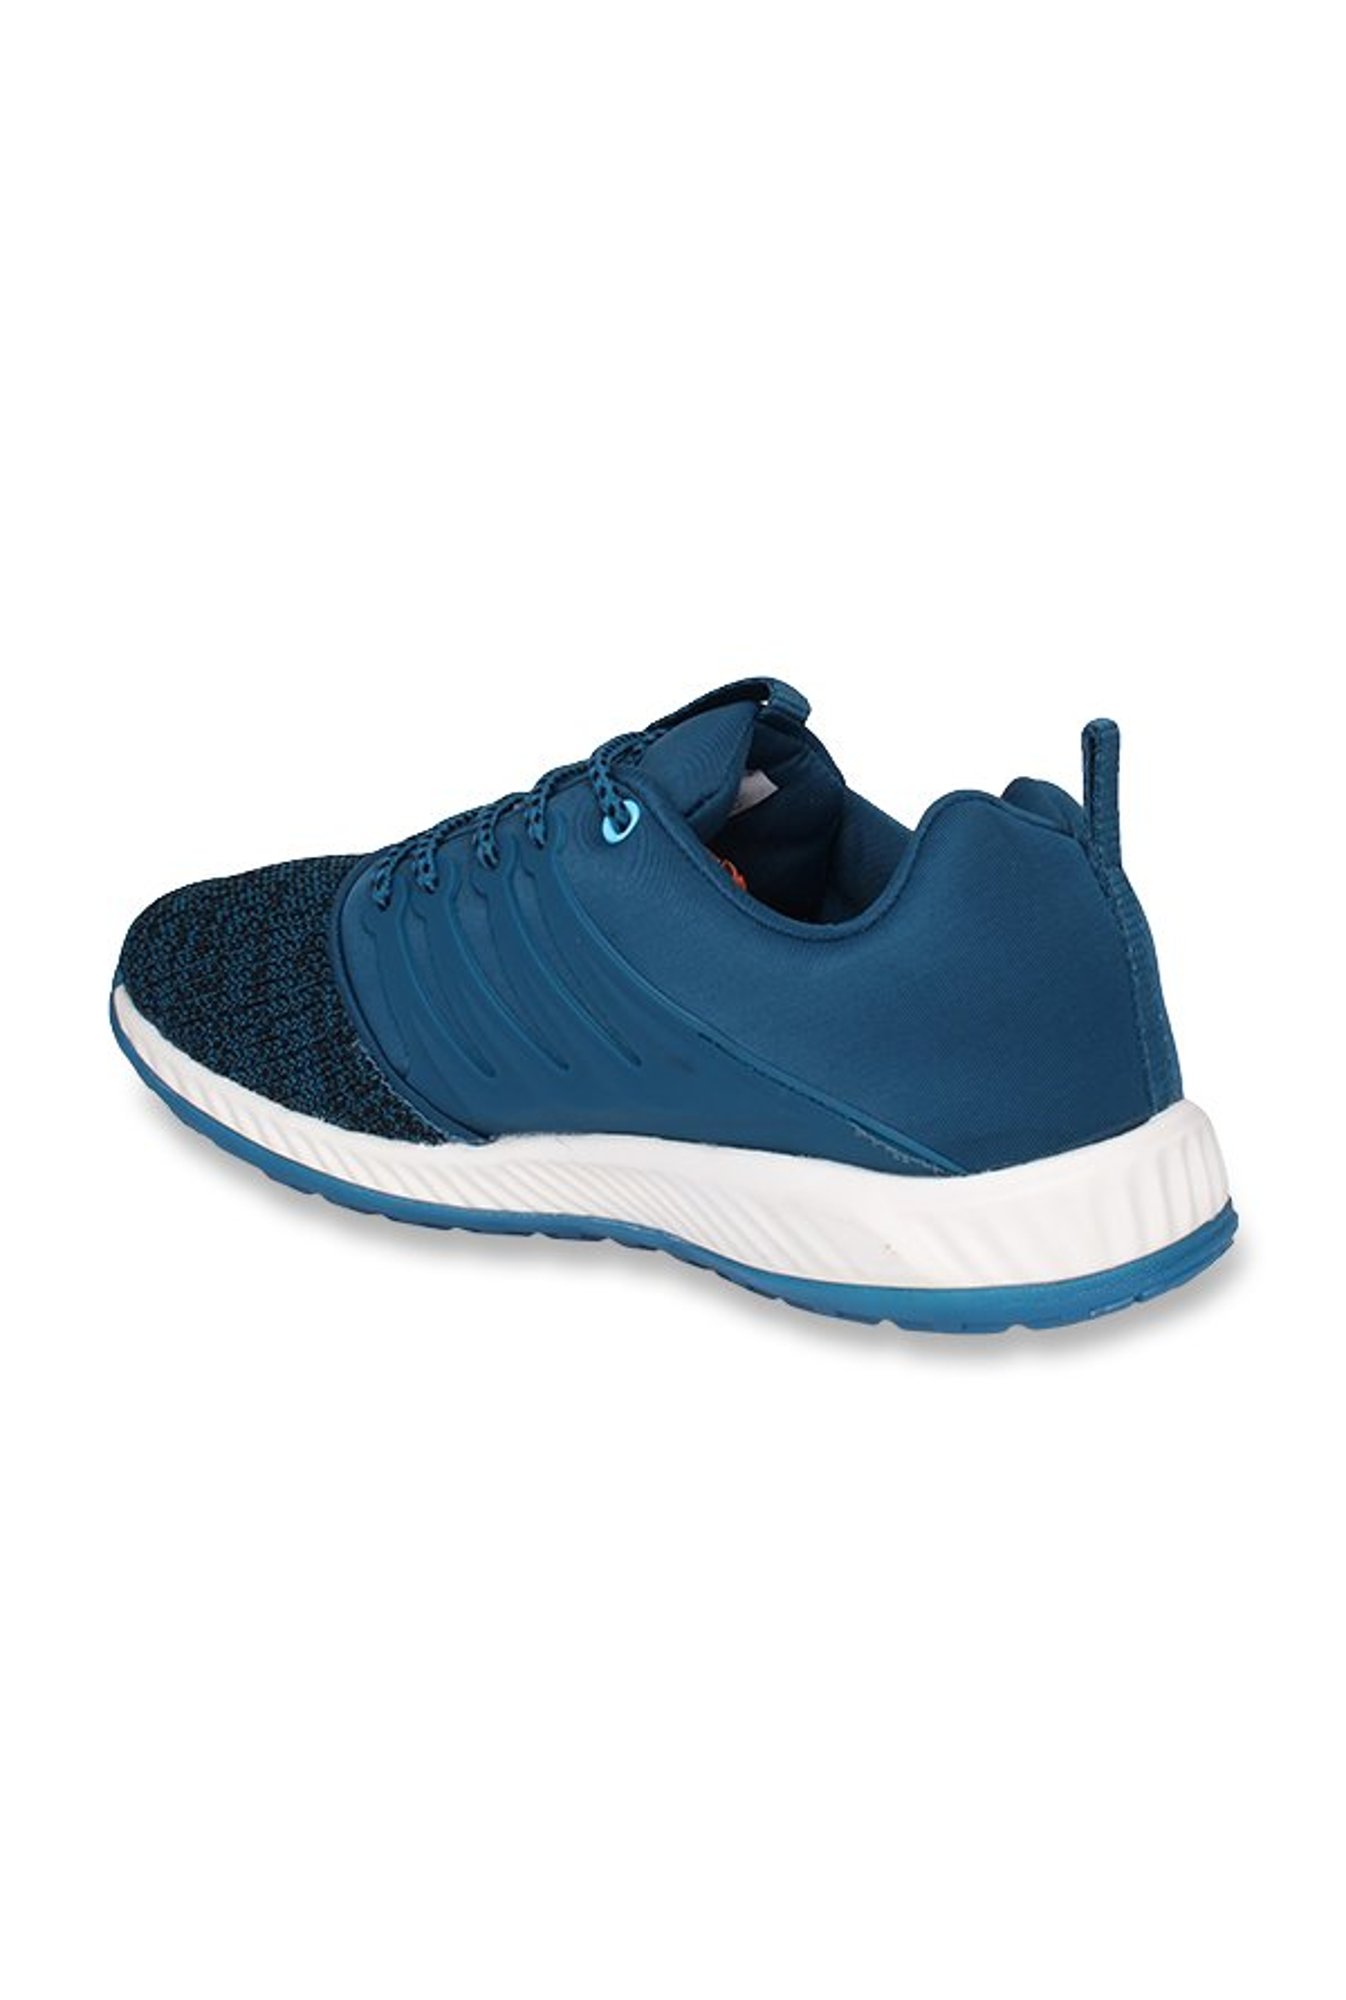 Sparx Turkey Blue Running Shoes from 